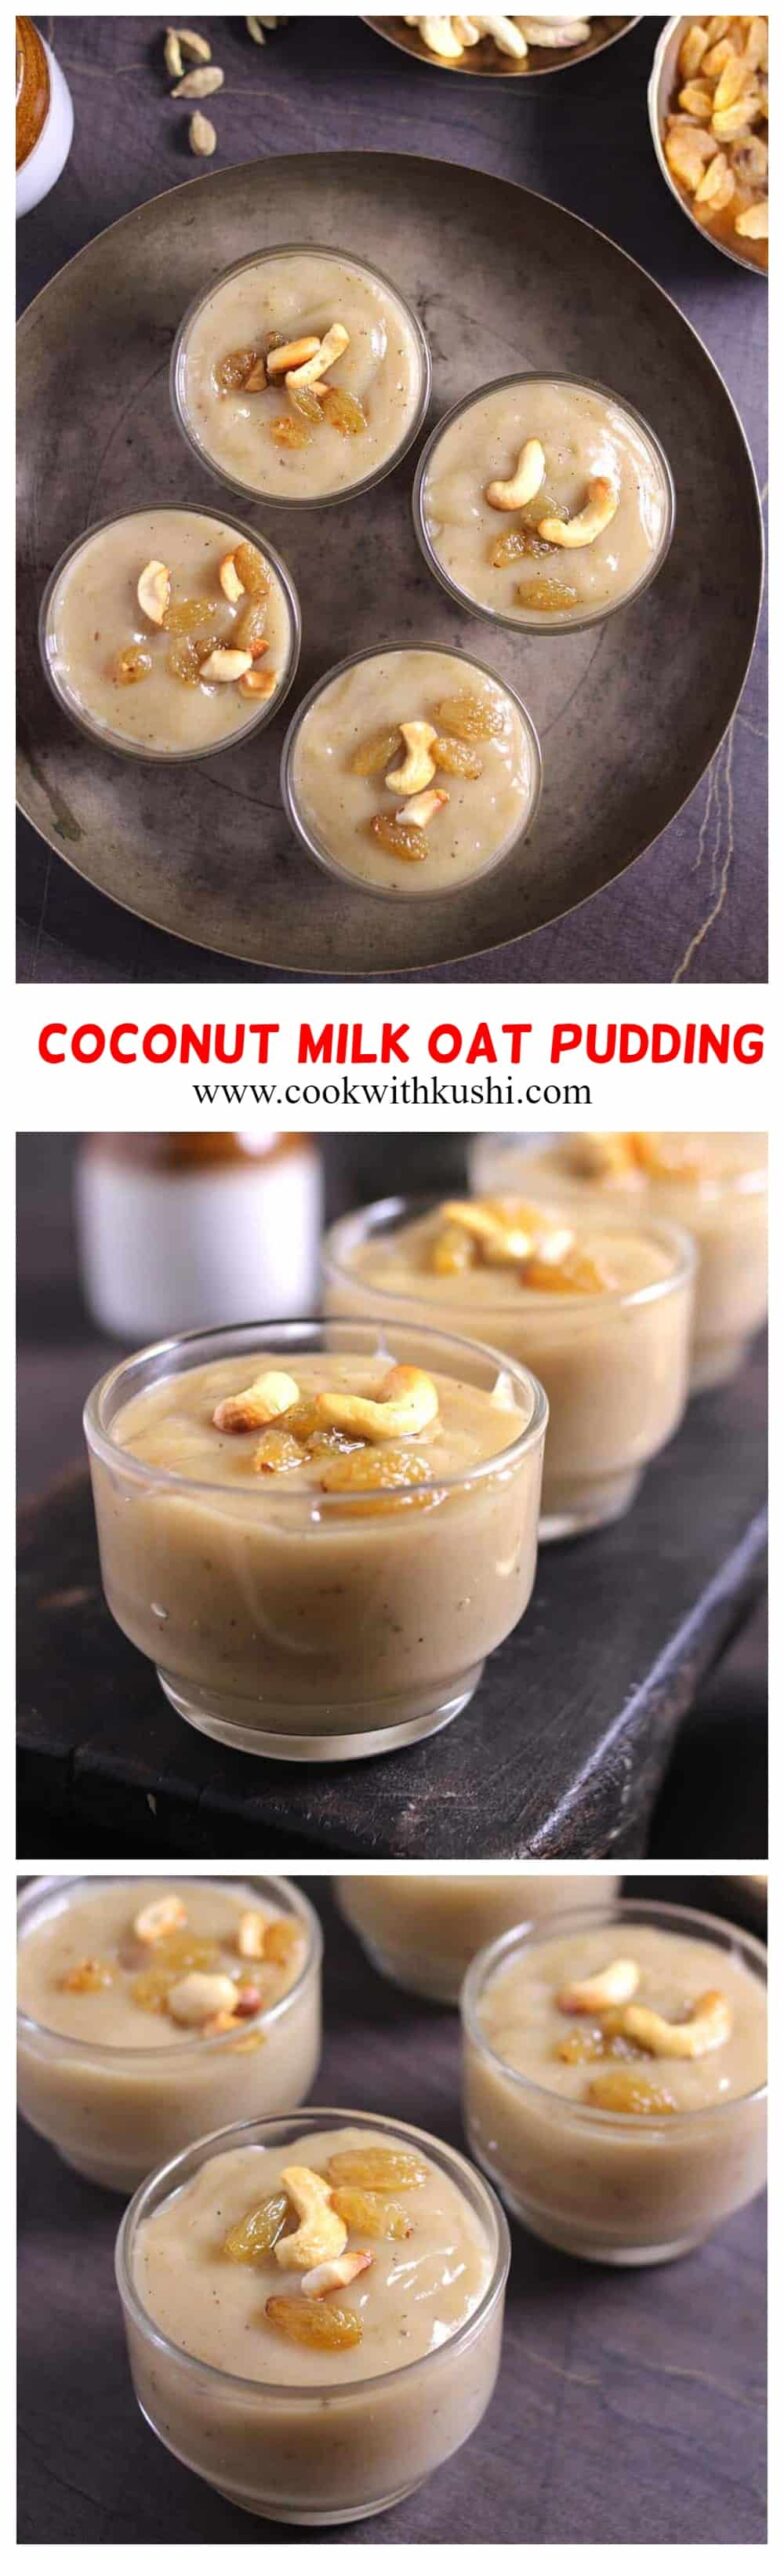 how to make pudding with oat milk & coconut milk #oats #pudding